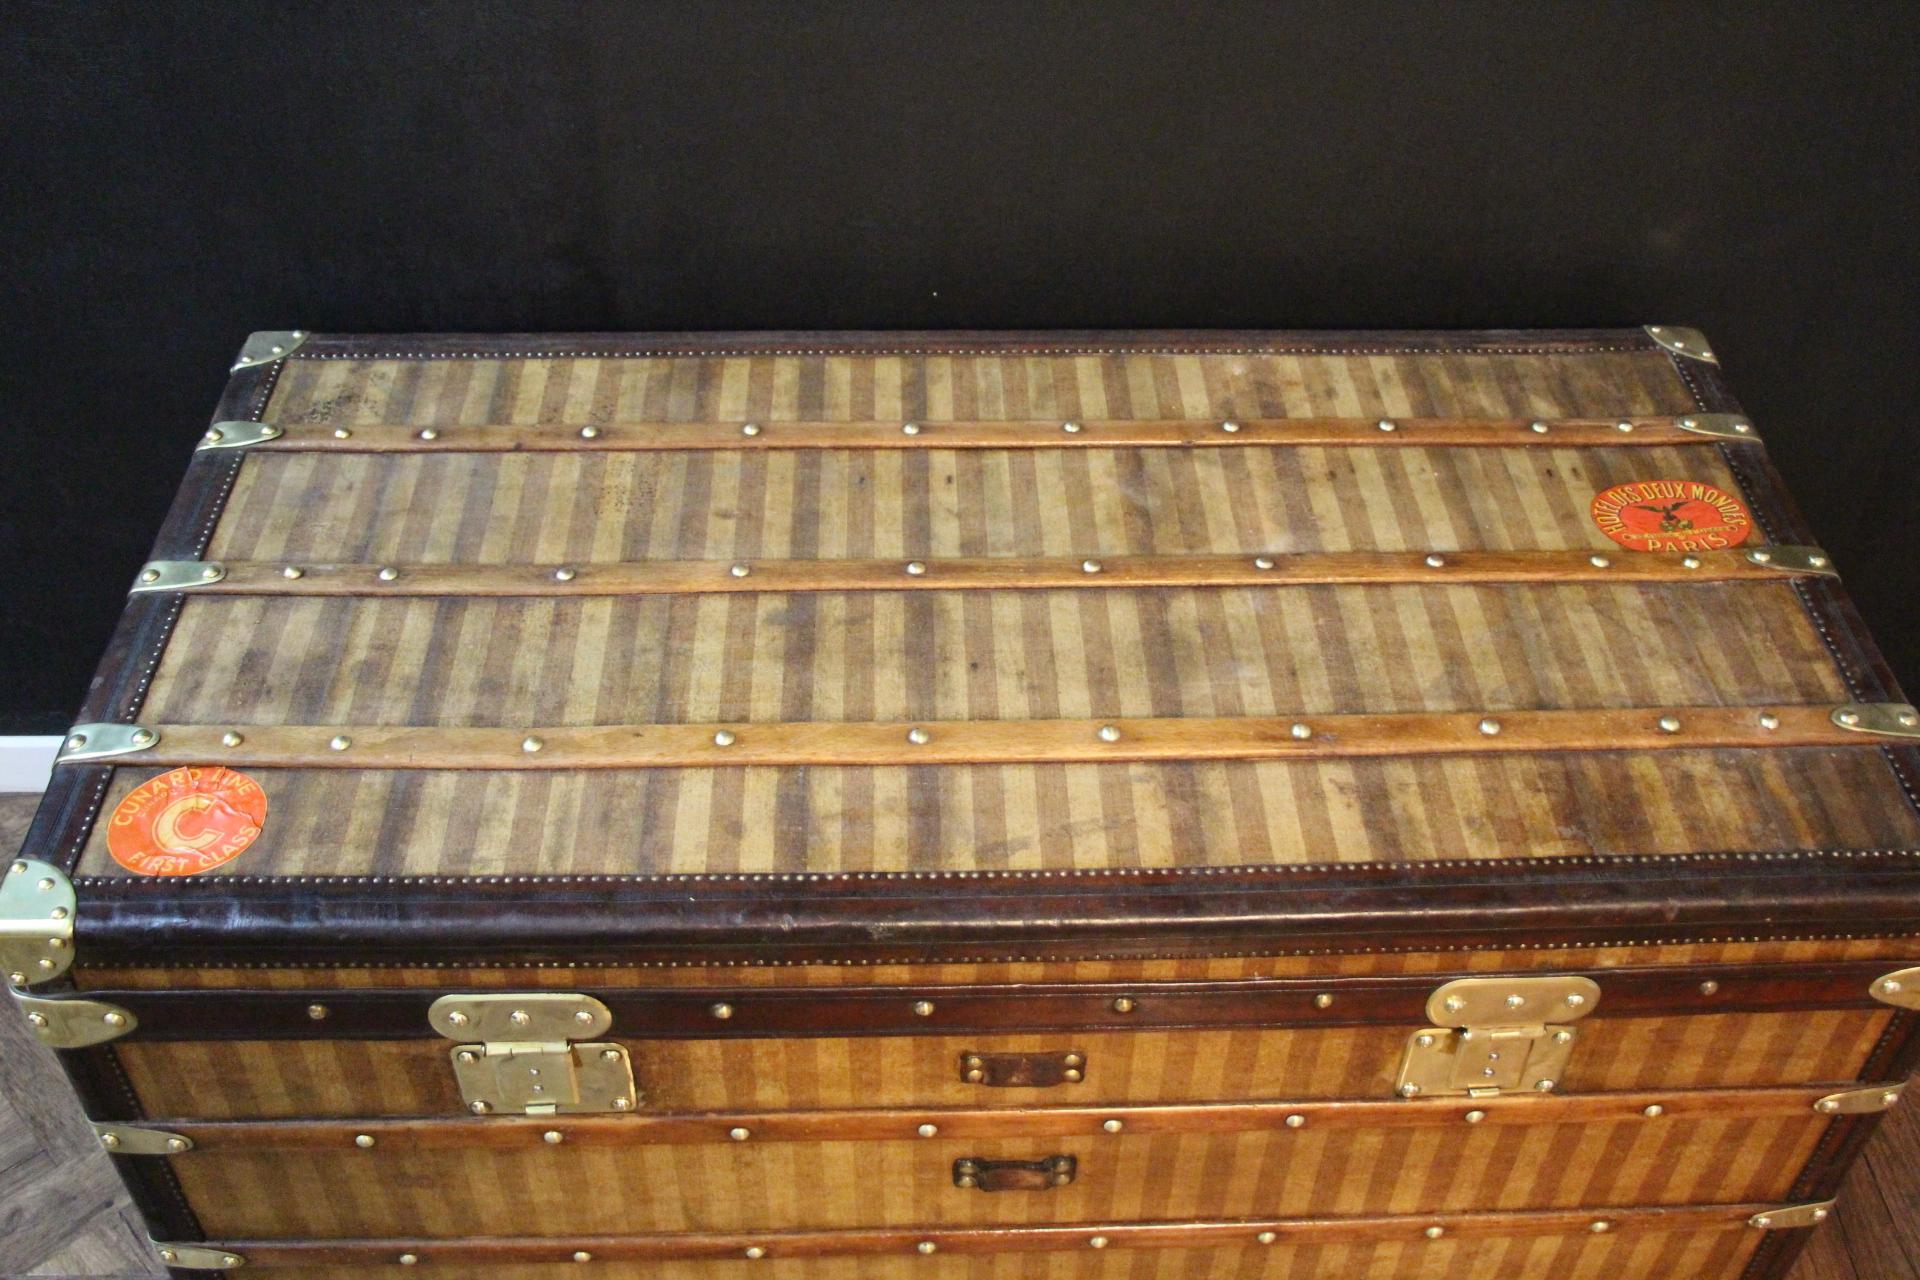 This Louis Vuitton steamer trunk, circa 1880s, features the sought after striped 